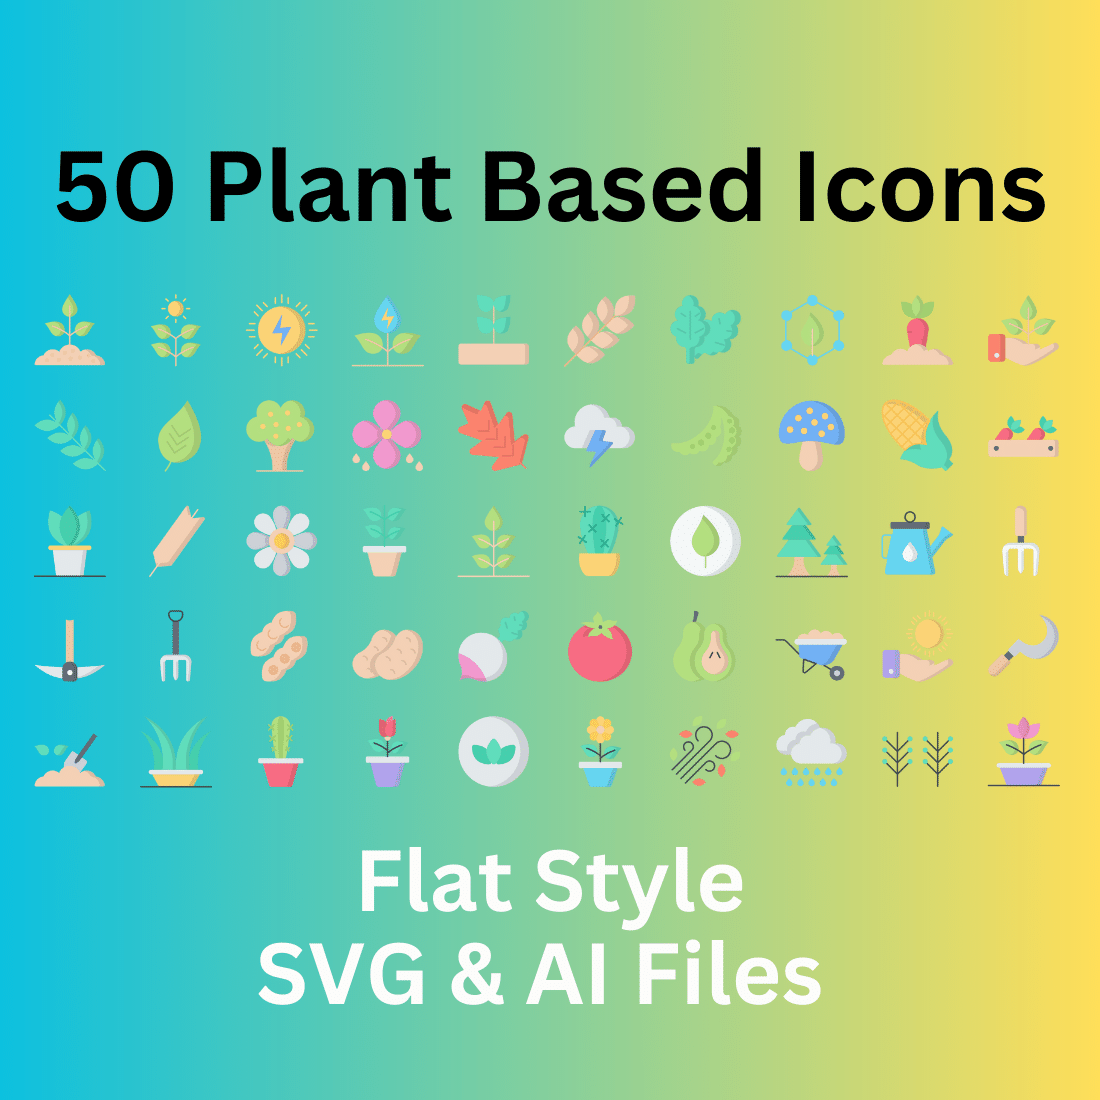 Plant Based Icon Set 50 Flat Icons - SVG And AI Files cover image.